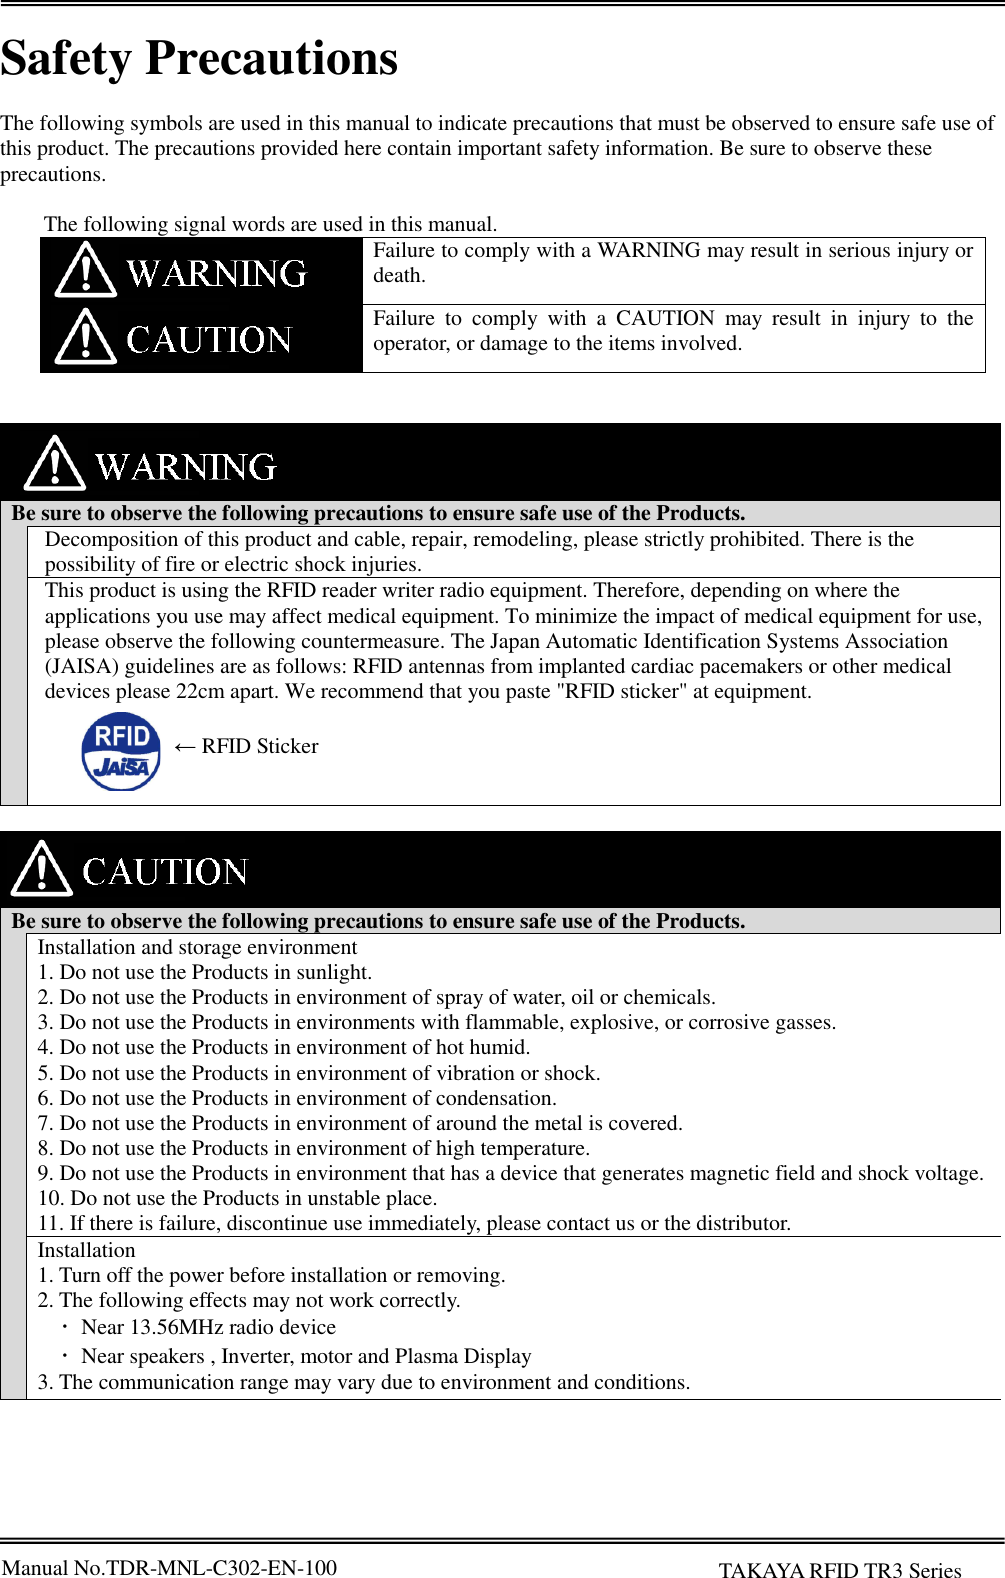 Manual No.TDR-MNL-C302-EN-100    TAKAYA RFID TR3 Series  Safety Precautions  The following symbols are used in this manual to indicate precautions that must be observed to ensure safe use of this product. The precautions provided here contain important safety information. Be sure to observe these precautions.    The following signal words are used in this manual.  Failure to comply with a WARNING may result in serious injury or death.  Failure  to  comply  with  a  CAUTION  may  result  in  injury  to  the operator, or damage to the items involved.       Be sure to observe the following precautions to ensure safe use of the Products.  Decomposition of this product and cable, repair, remodeling, please strictly prohibited. There is the possibility of fire or electric shock injuries. This product is using the RFID reader writer radio equipment. Therefore, depending on where the applications you use may affect medical equipment. To minimize the impact of medical equipment for use, please observe the following countermeasure. The Japan Automatic Identification Systems Association (JAISA) guidelines are as follows: RFID antennas from implanted cardiac pacemakers or other medical devices please 22cm apart. We recommend that you paste &quot;RFID sticker&quot; at equipment.          Be sure to observe the following precautions to ensure safe use of the Products.  Installation and storage environment 1. Do not use the Products in sunlight. 2. Do not use the Products in environment of spray of water, oil or chemicals. 3. Do not use the Products in environments with flammable, explosive, or corrosive gasses. 4. Do not use the Products in environment of hot humid. 5. Do not use the Products in environment of vibration or shock. 6. Do not use the Products in environment of condensation. 7. Do not use the Products in environment of around the metal is covered. 8. Do not use the Products in environment of high temperature. 9. Do not use the Products in environment that has a device that generates magnetic field and shock voltage. 10. Do not use the Products in unstable place. 11. If there is failure, discontinue use immediately, please contact us or the distributor. Installation 1. Turn off the power before installation or removing. 2. The following effects may not work correctly.   ･  Near 13.56MHz radio device   ･  Near speakers , Inverter, motor and Plasma Display 3. The communication range may vary due to environment and conditions.   ← RFID Sticker 